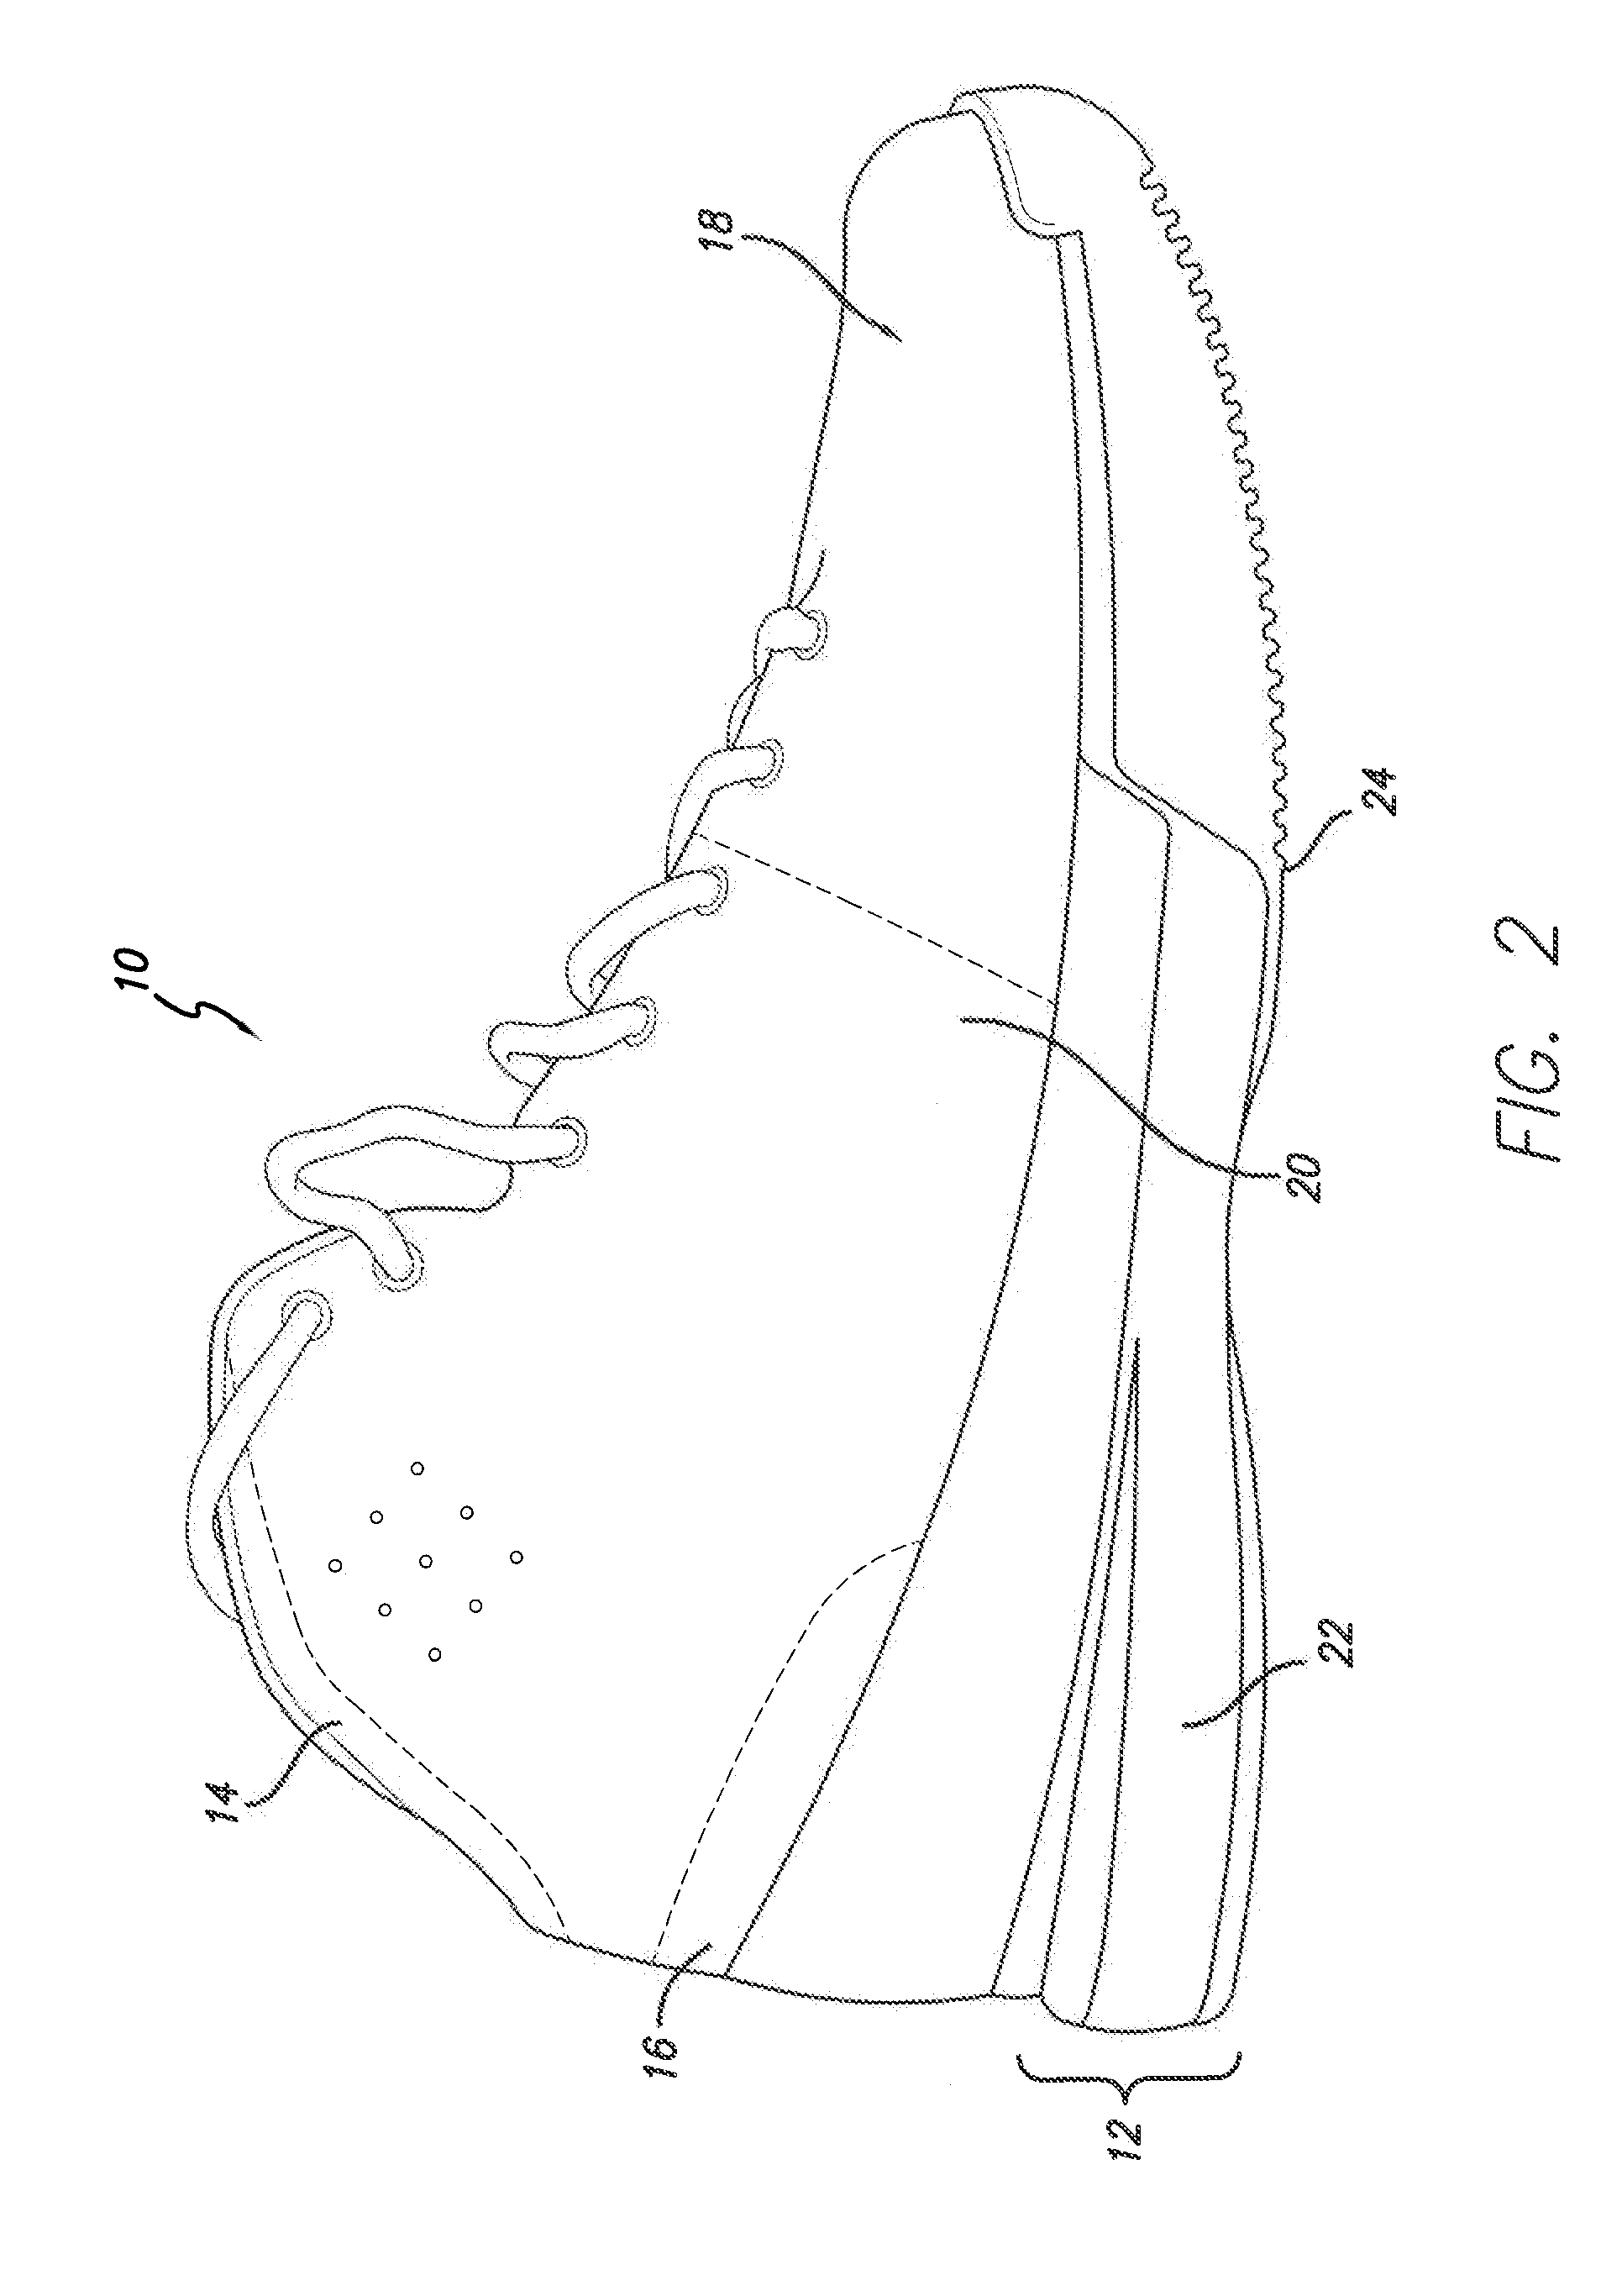 Form-Fitting Articles and Method for Customizing Articles to be Form-Fitted